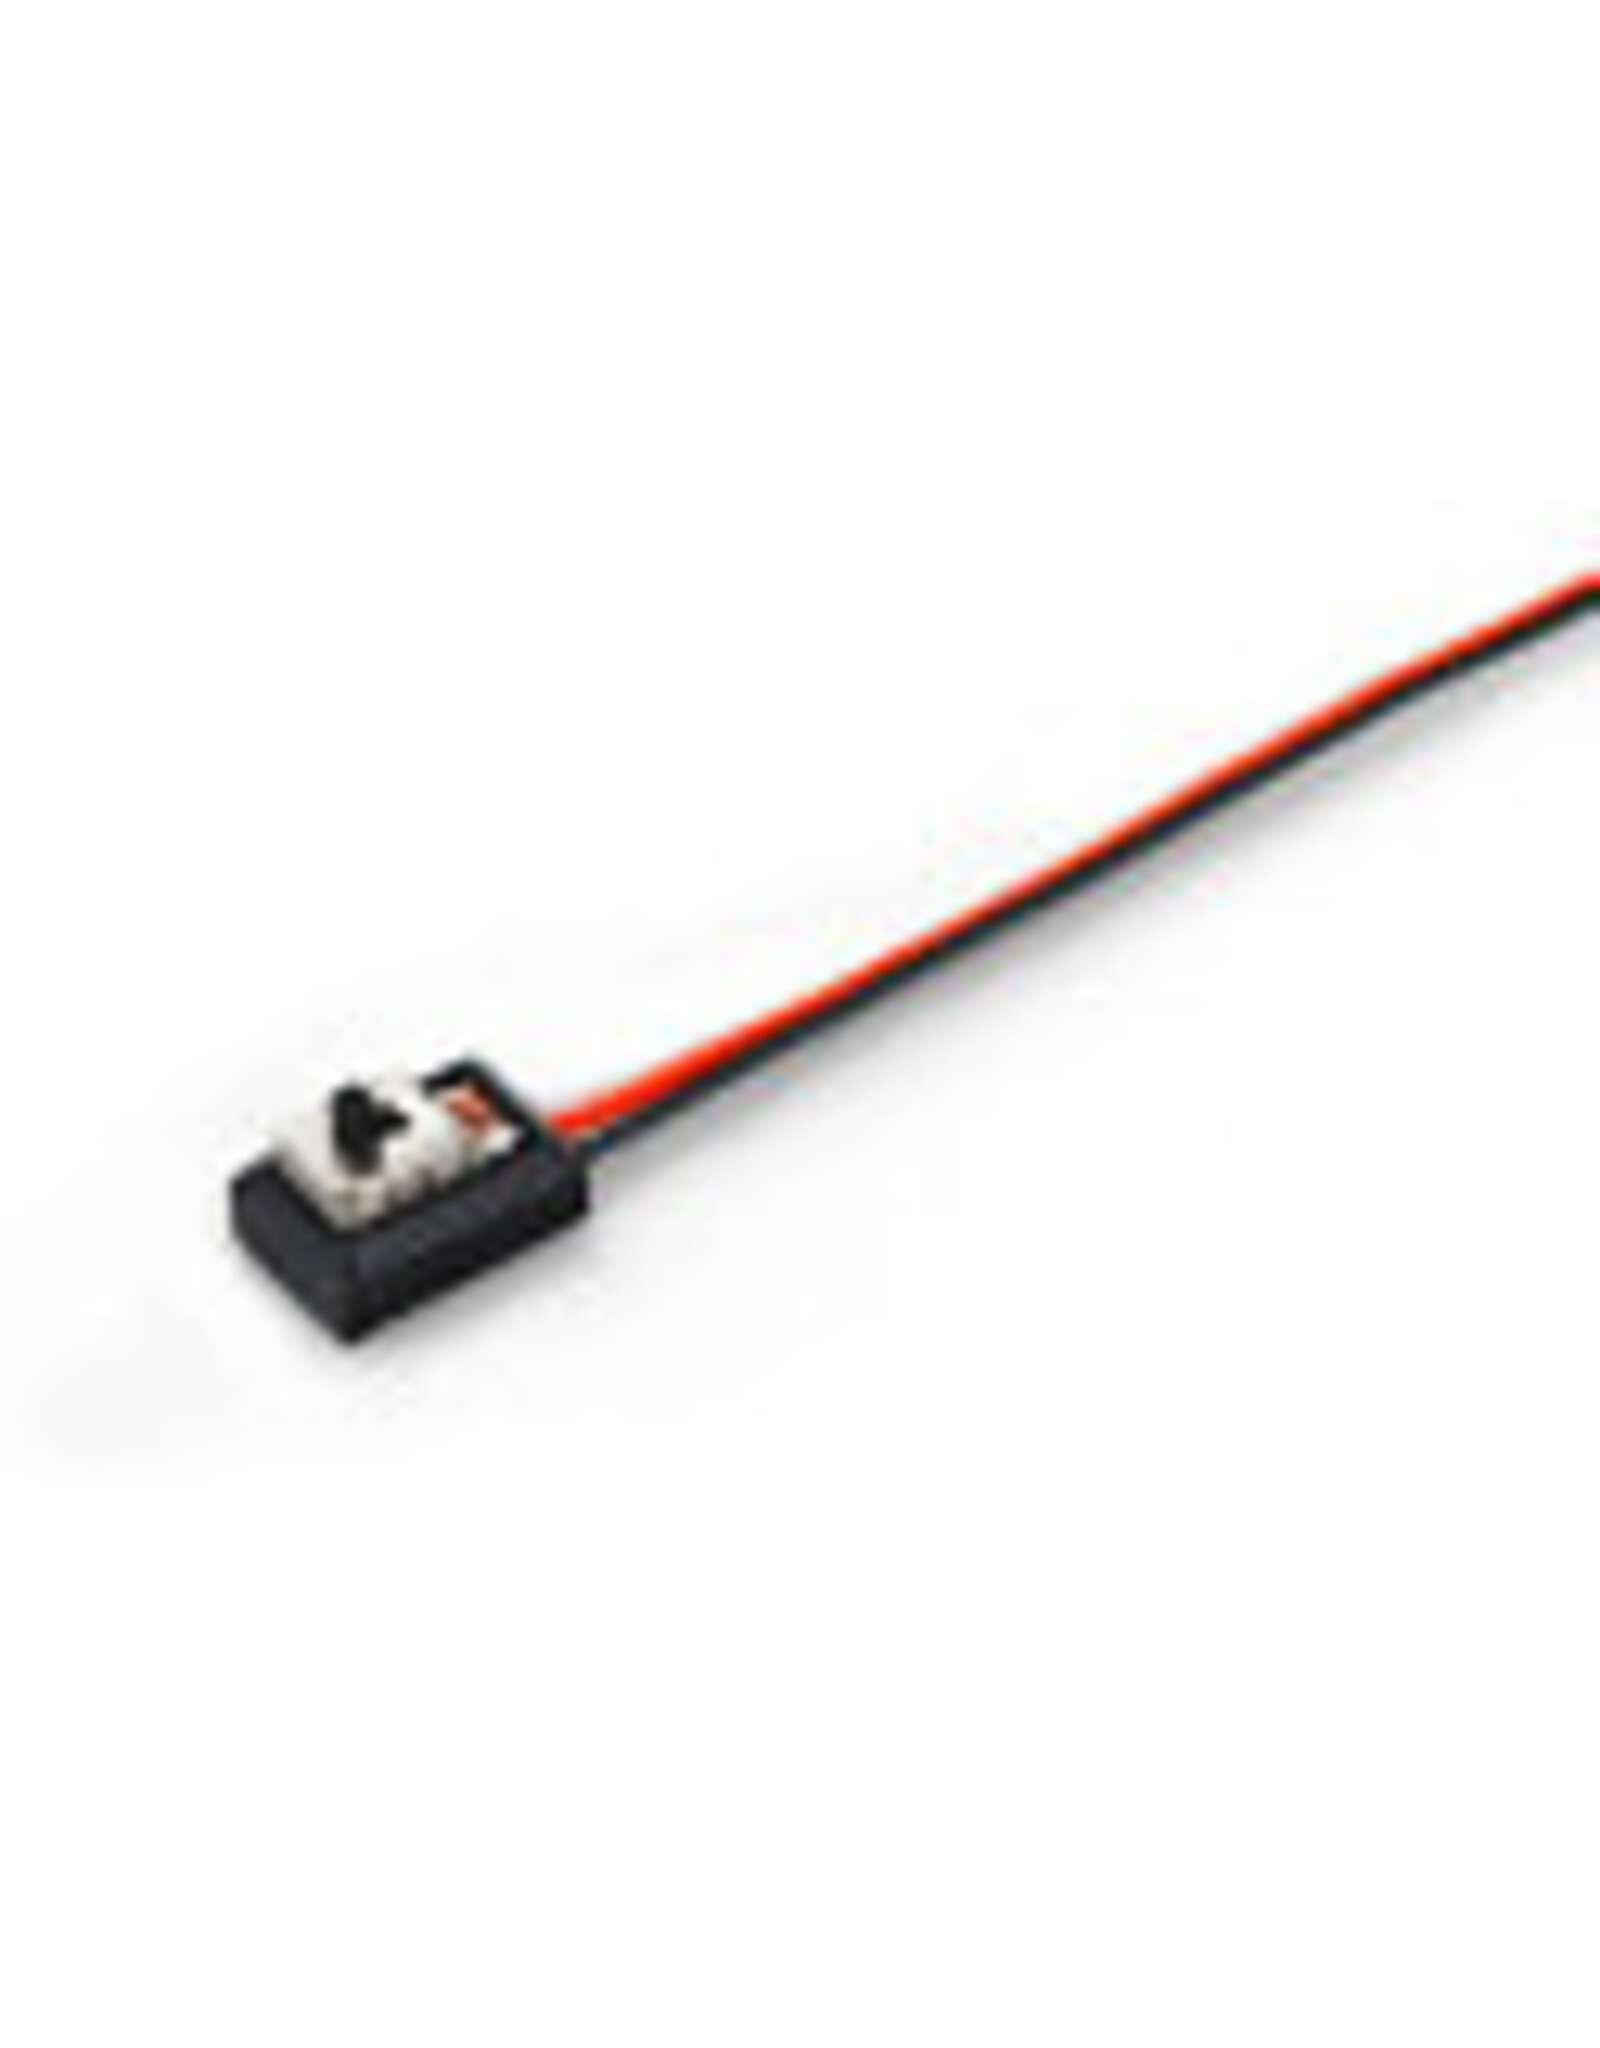 Hobbywing ESC Switch (Type B) for EzRun 18A, XeRun 120A/60A V2.1, Xtreme and Justock